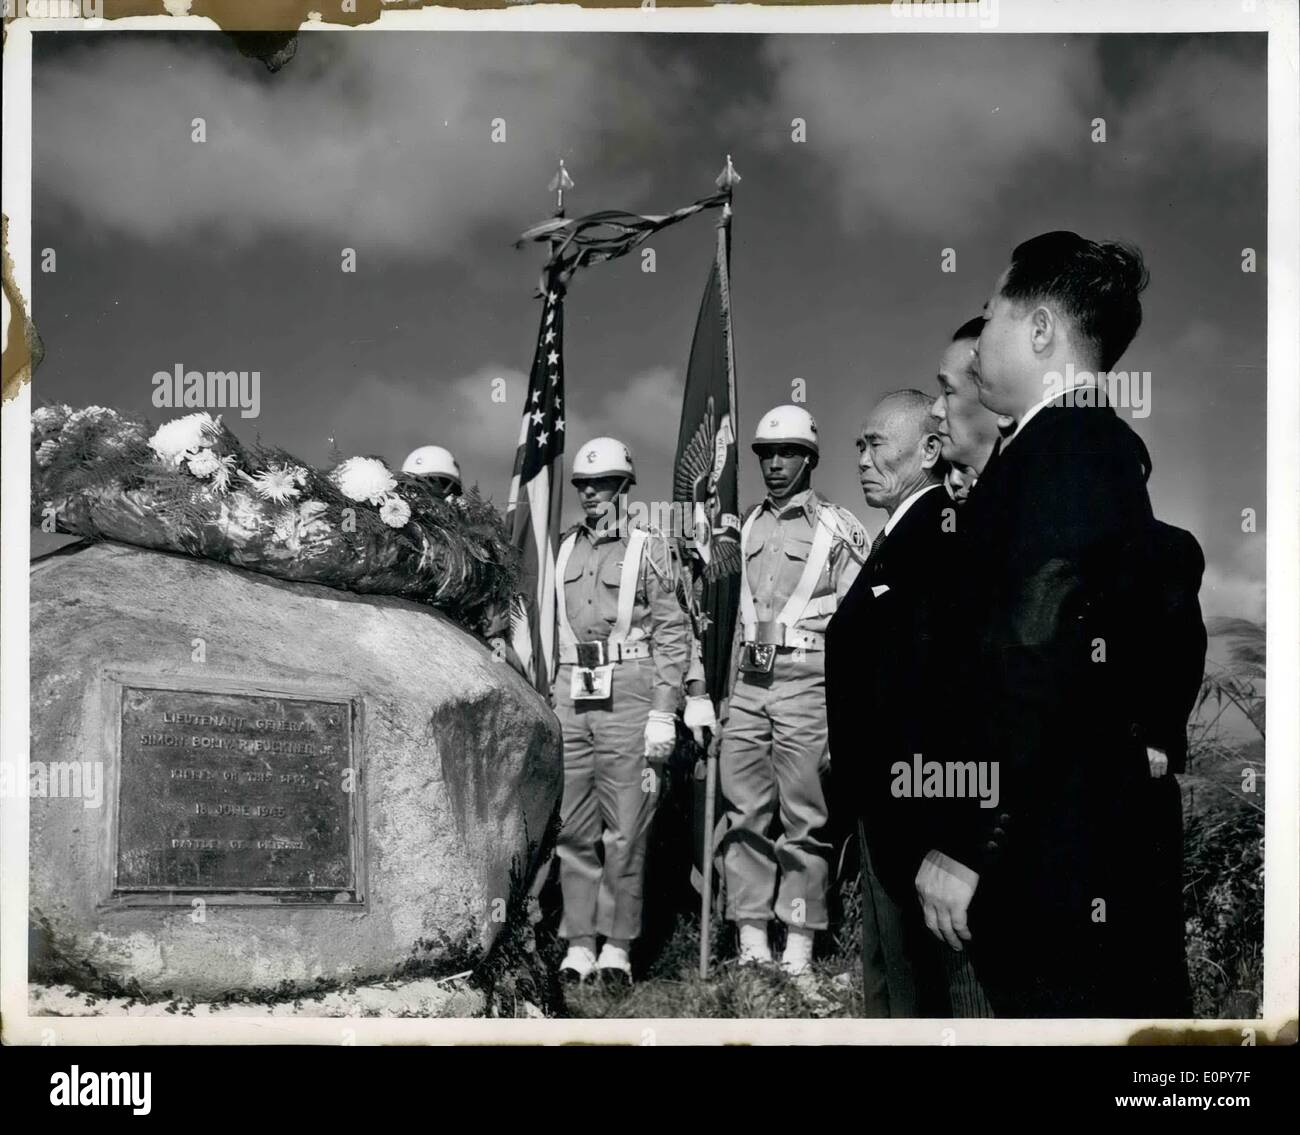 May 05, 1957 - America Honors Its ar Dead: A Stone Monument On Okinawa Marks The Spot Where Lieutenant General Simon Bolivar Buckner, Commander Of The U.S. Tenth Army, Was Killed During The Invasion Of The Island, During World War II. 1945 Official U.S. Army Photo Released By The Dept. Of Defense Wash., D.C. Stock Photo